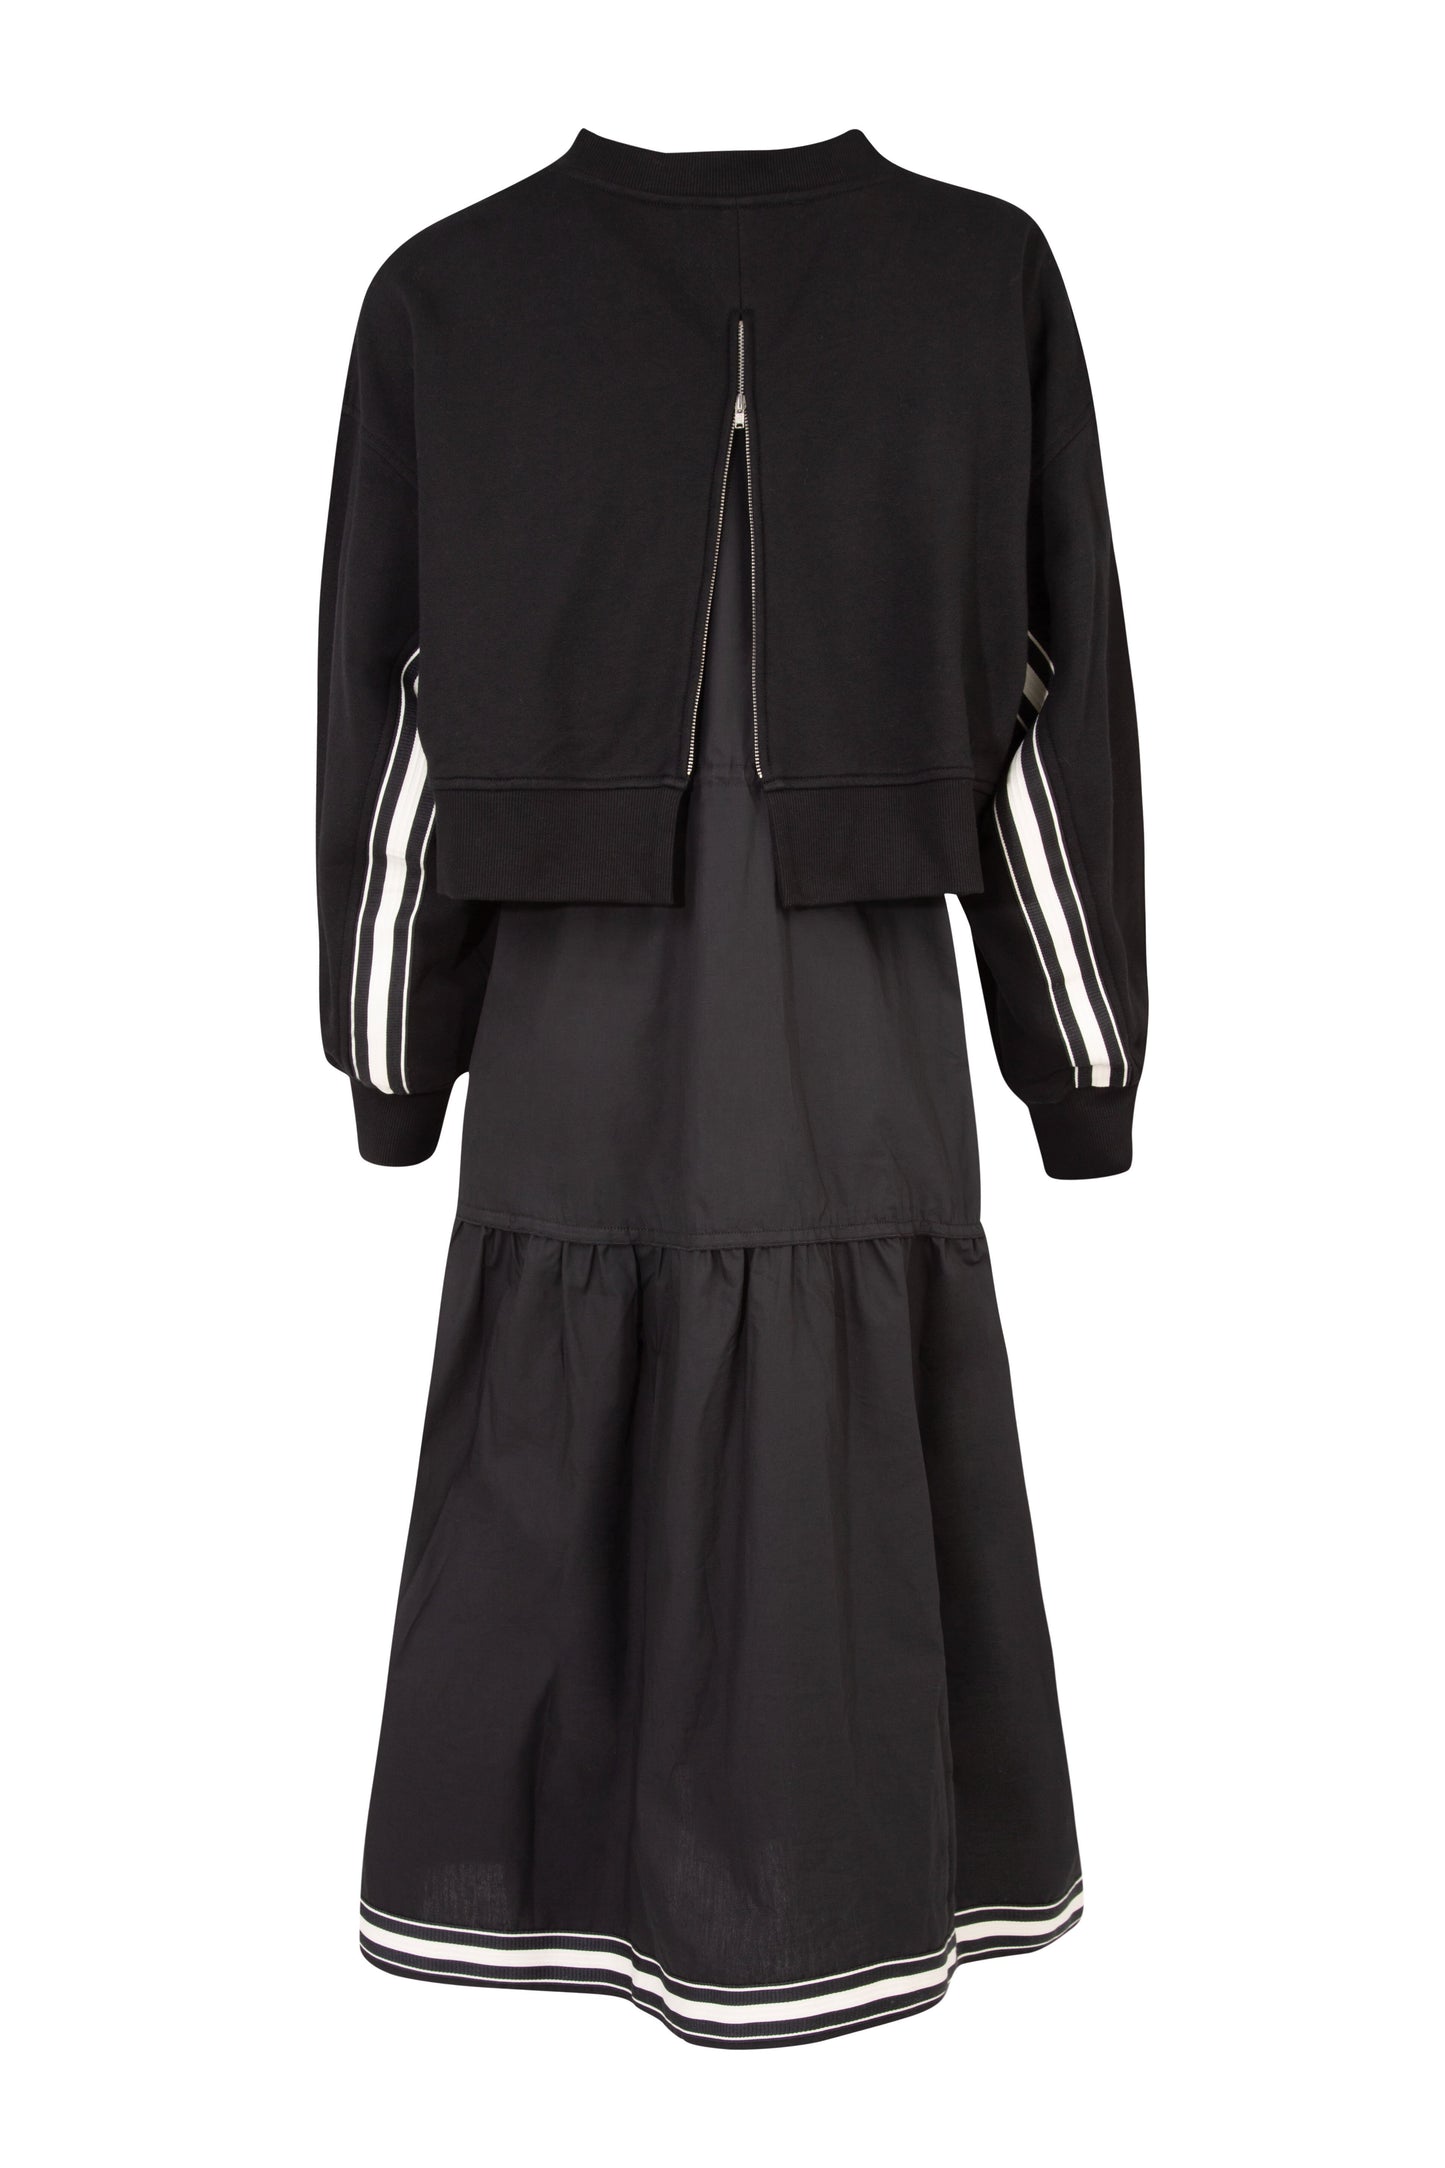 COOPER TWO OF A KIND DRESS - BLACK - THE VOGUE STORE